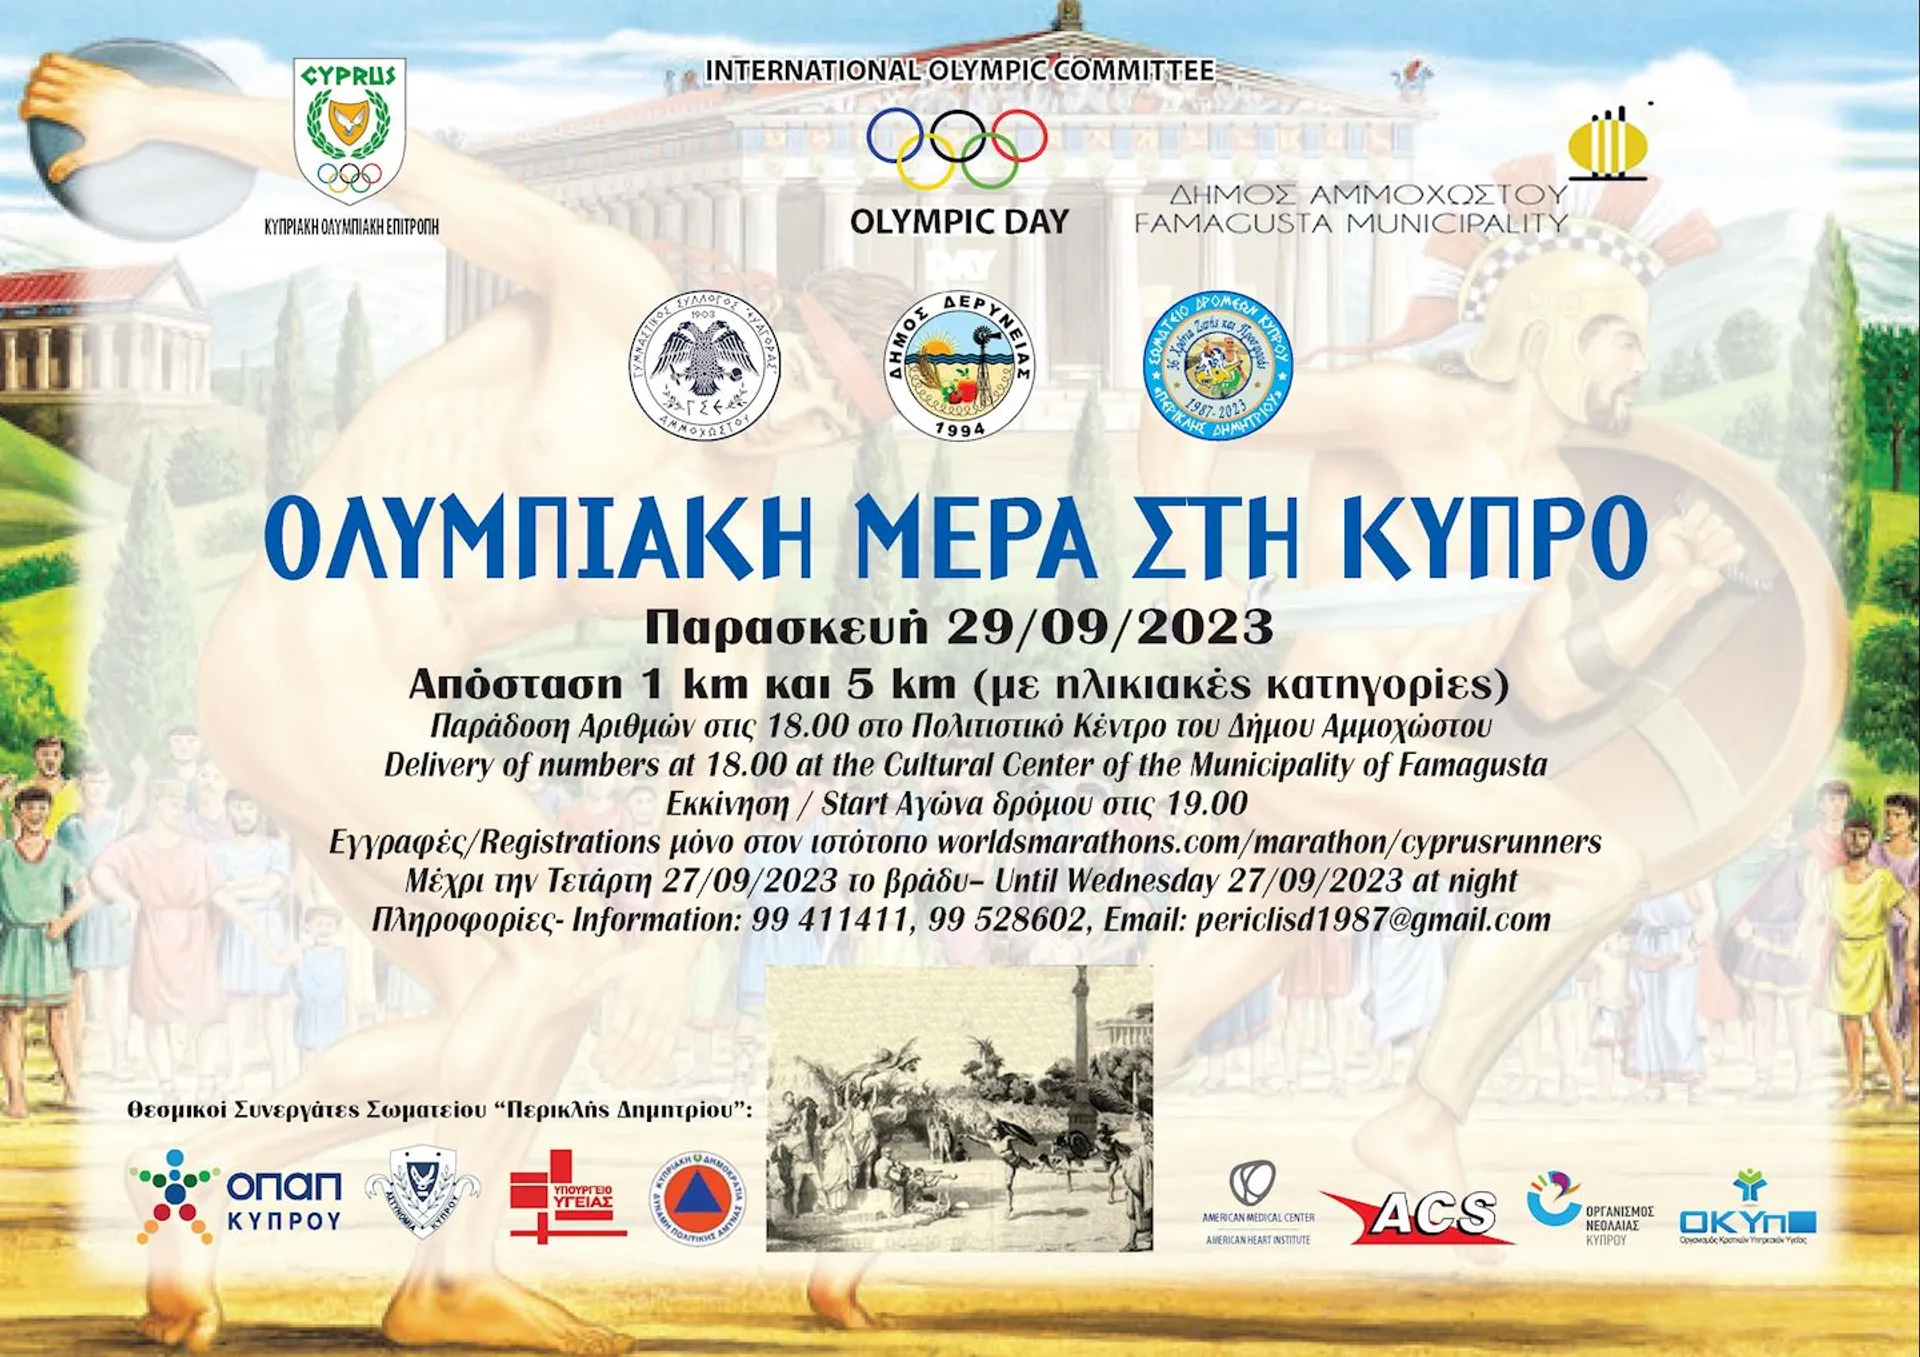 Image of Olympic day in Cyprus